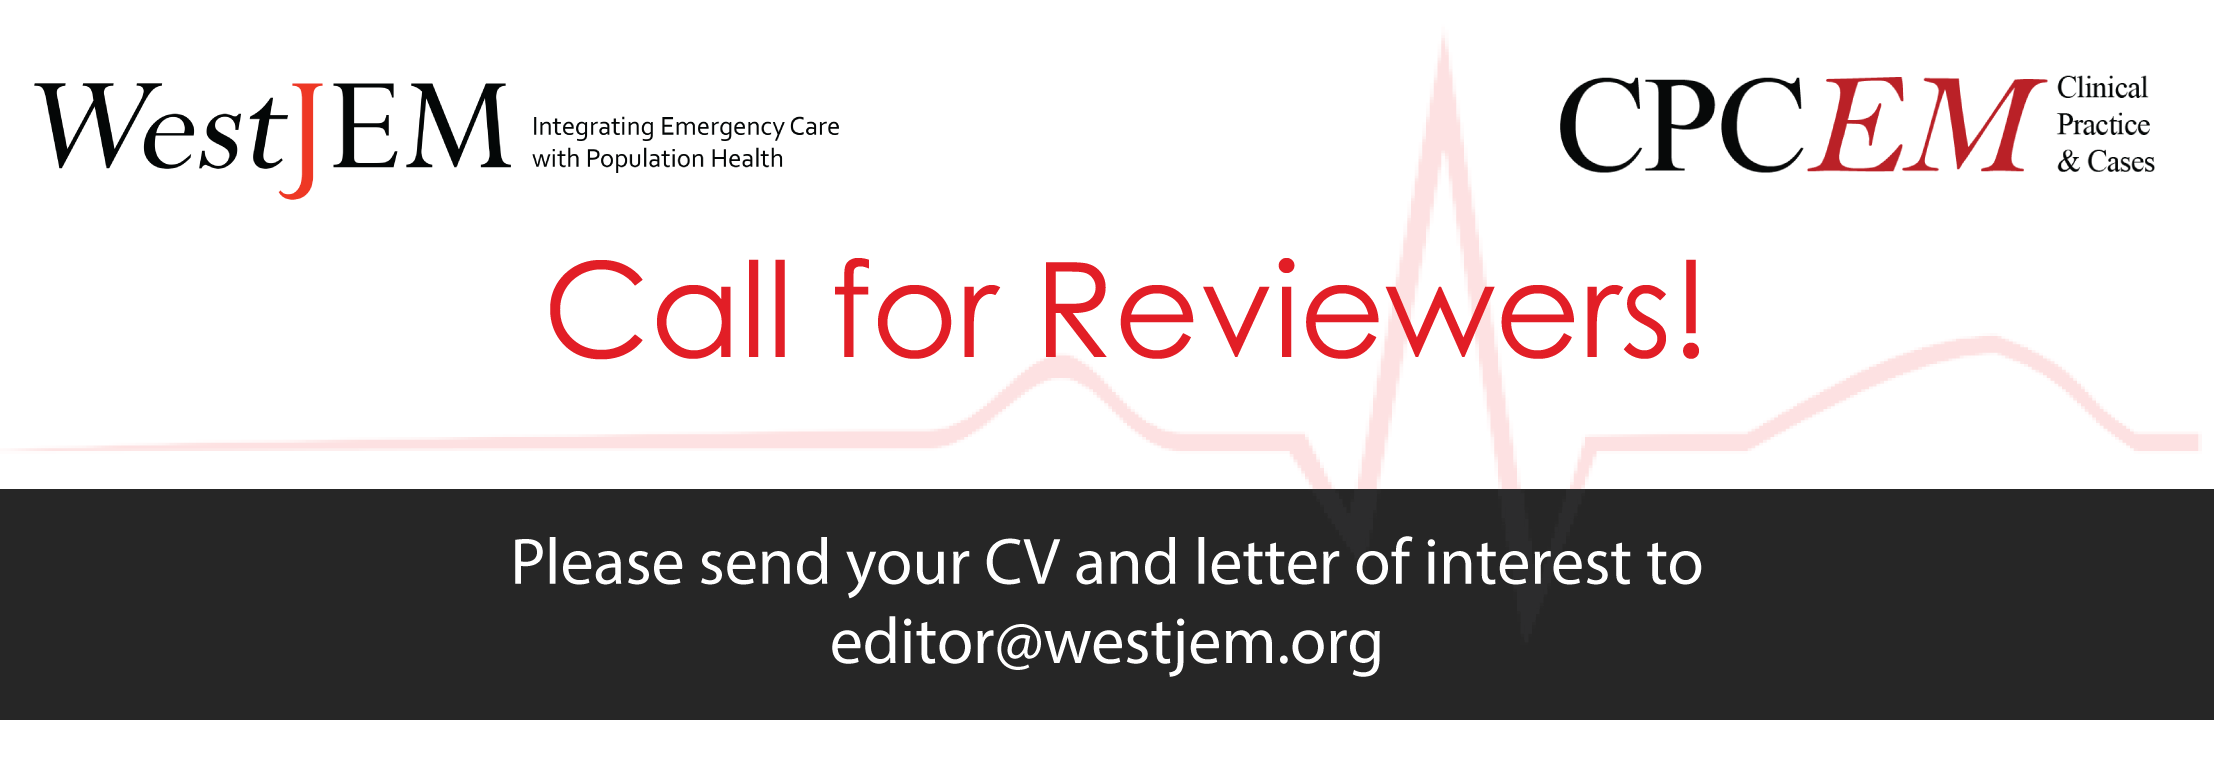 call-for-reviewersv1-rotating-banner